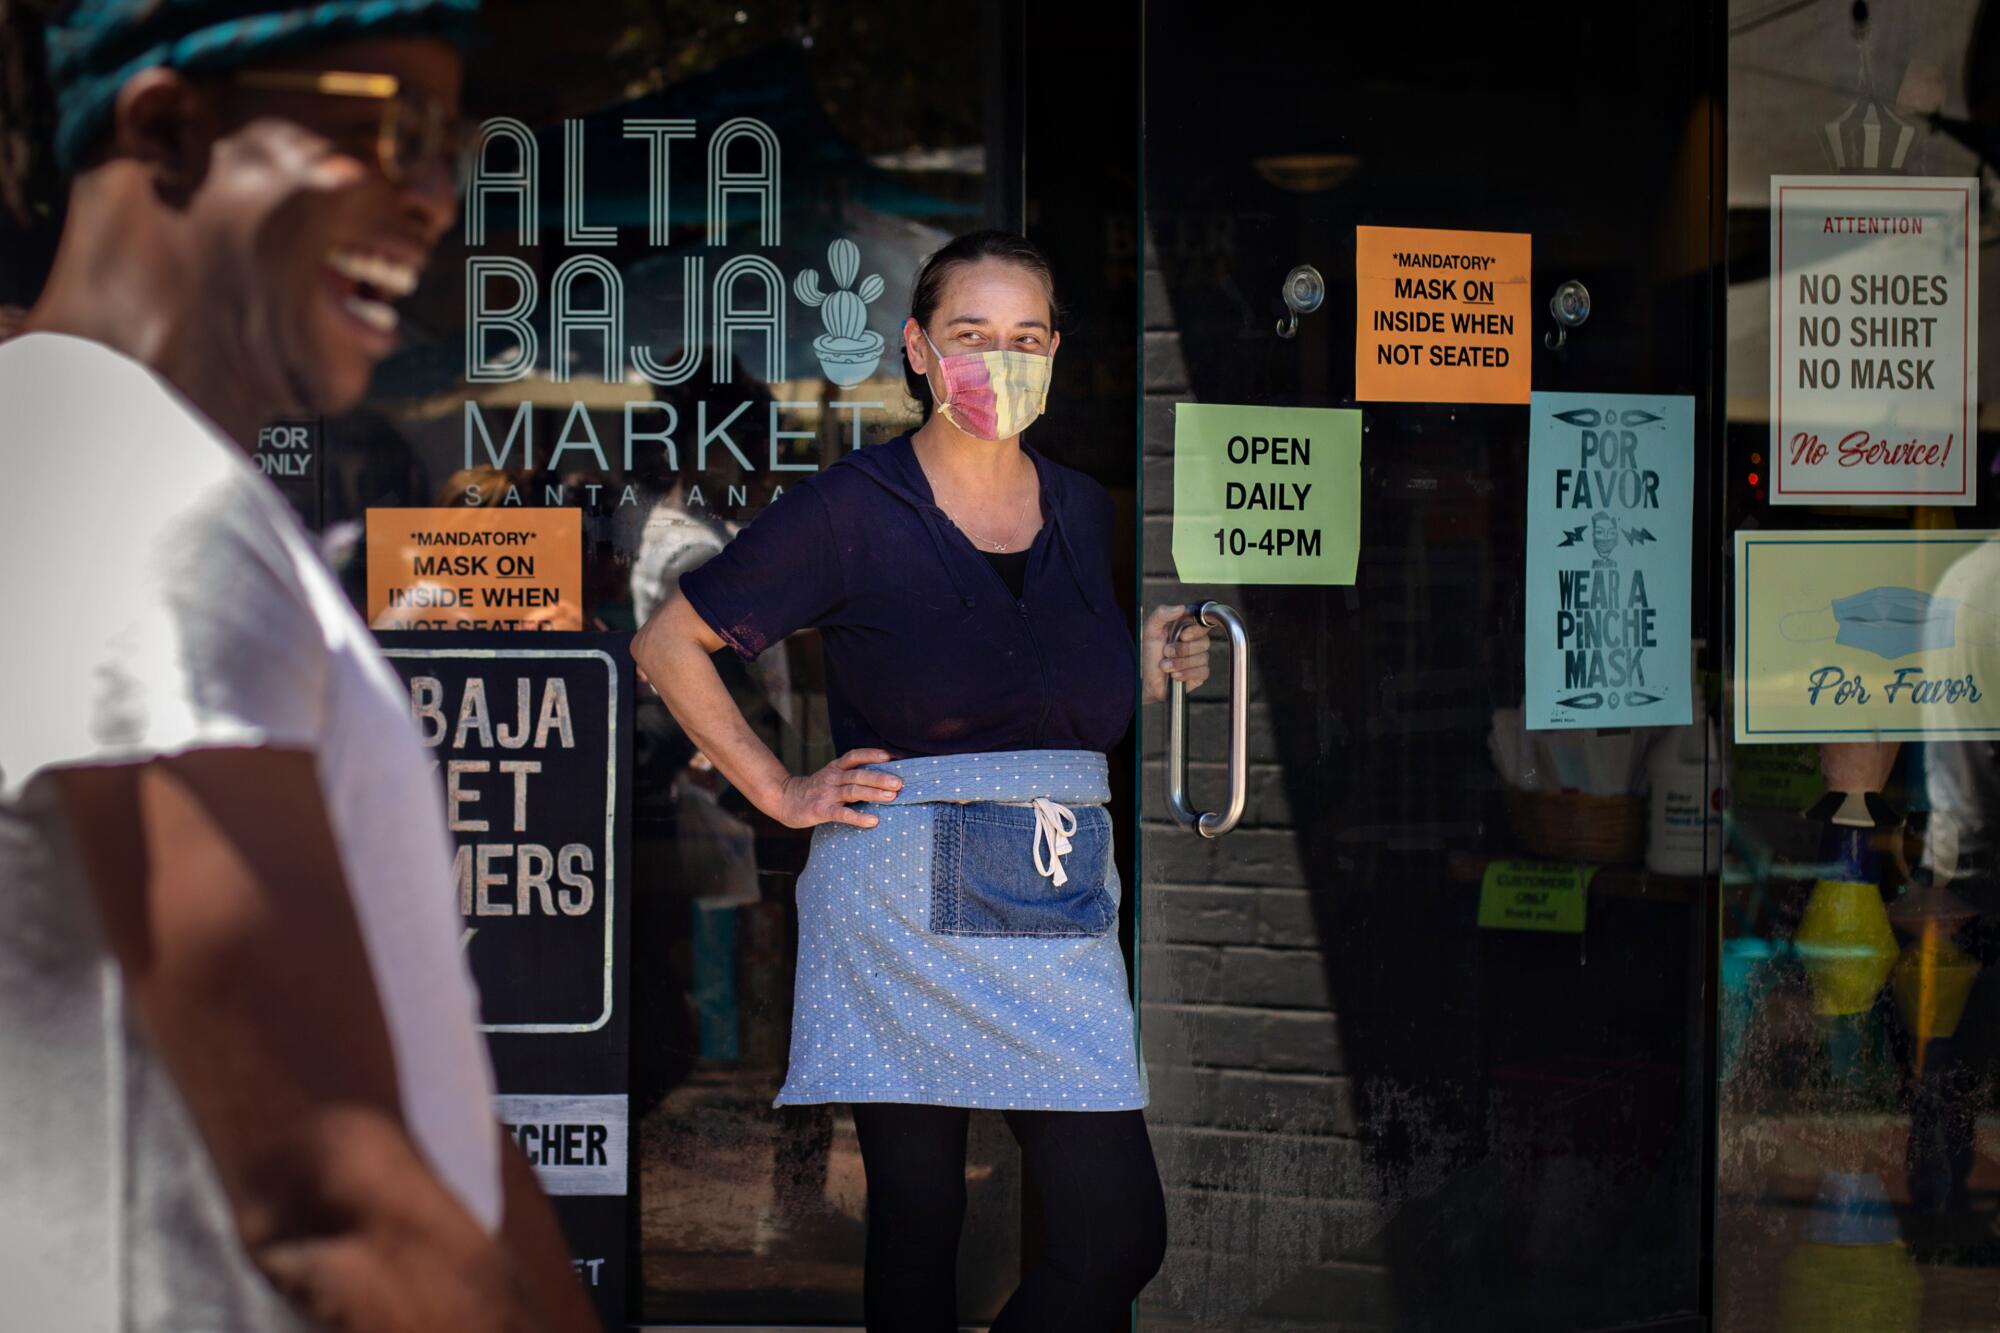 Delilah Snell at her store, Alta Baja Market, where she has enforced a mask mandate since the start of the pandemic.